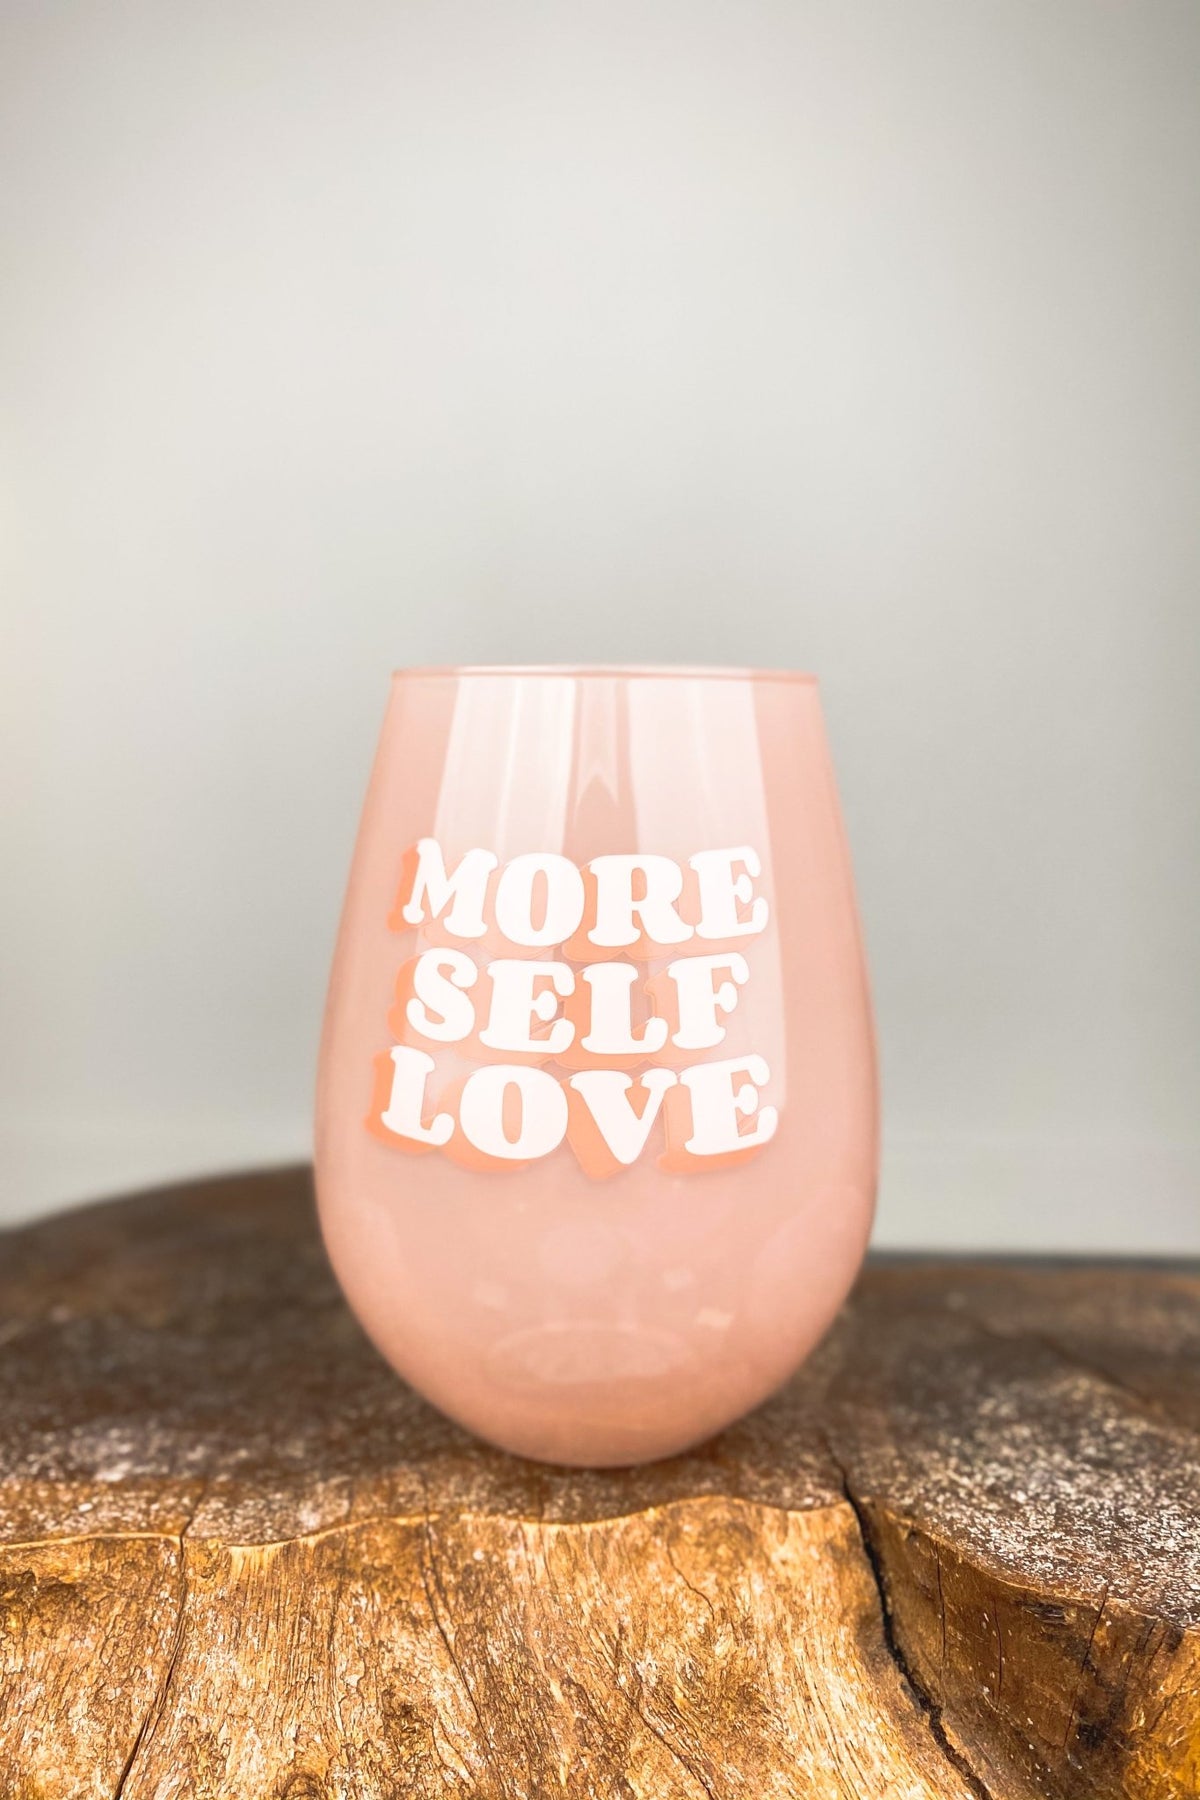 More self love jumbo wine glass - Trendy Tumblers, Mugs and Cups at Lush Fashion Lounge Boutique in Oklahoma City